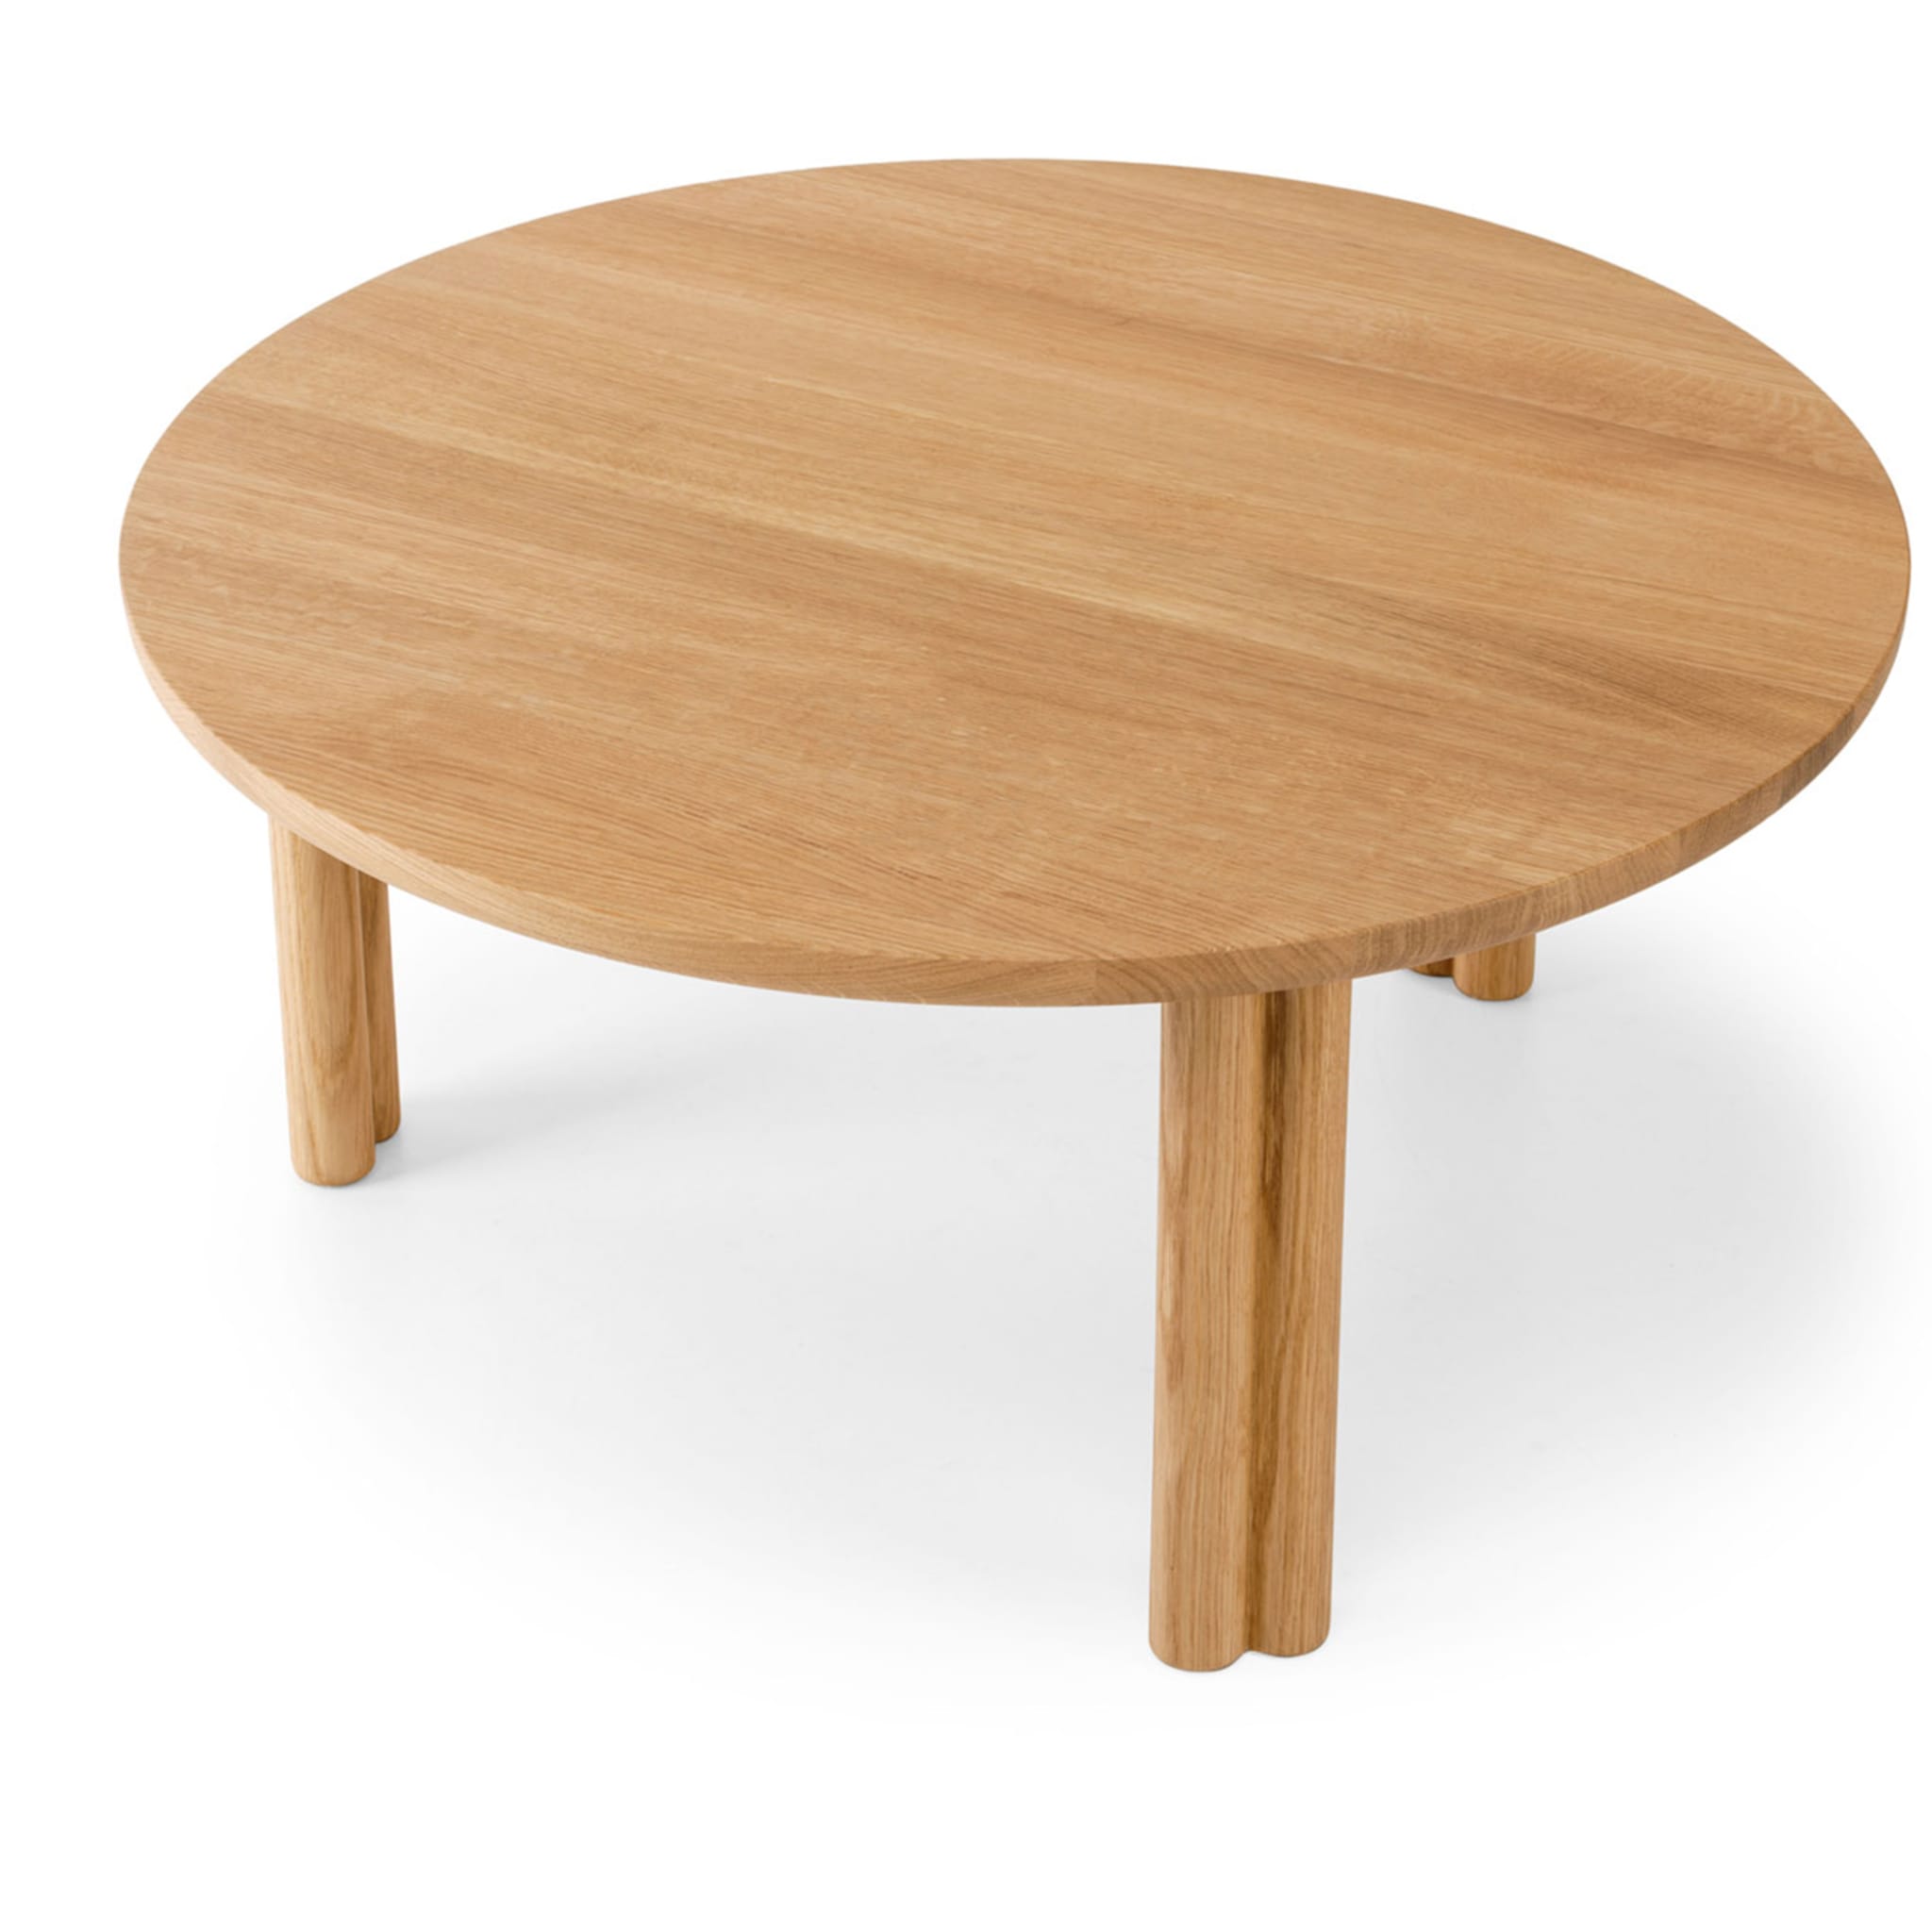 Silvestro Round Low Coffee Table - Alternative view 1